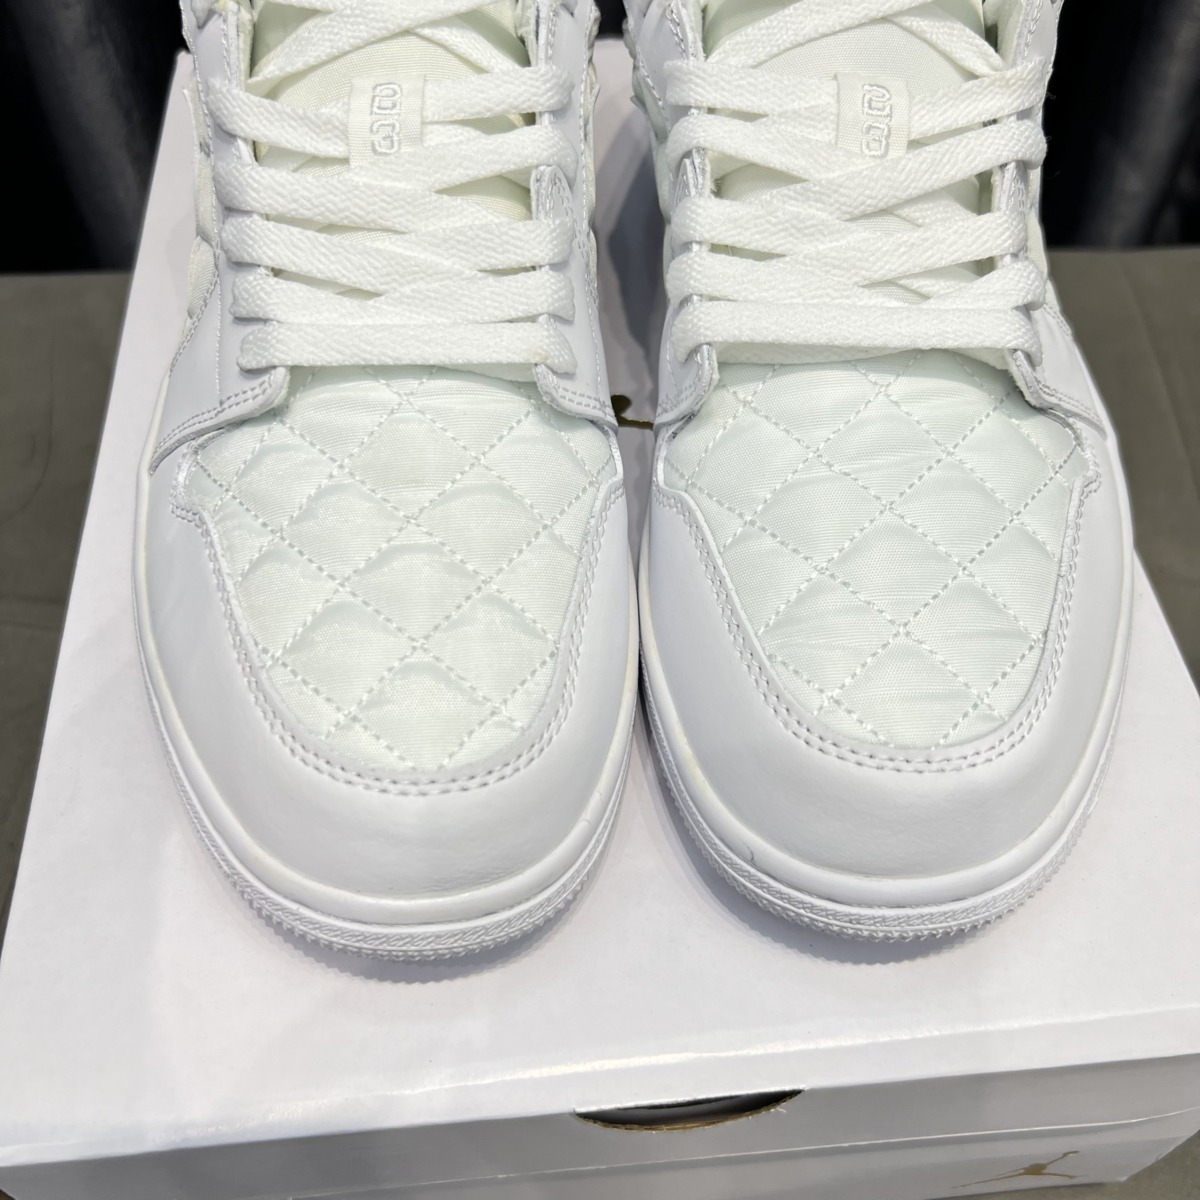 giay nike air jordan 1 low quilted white like auth 4 scaled